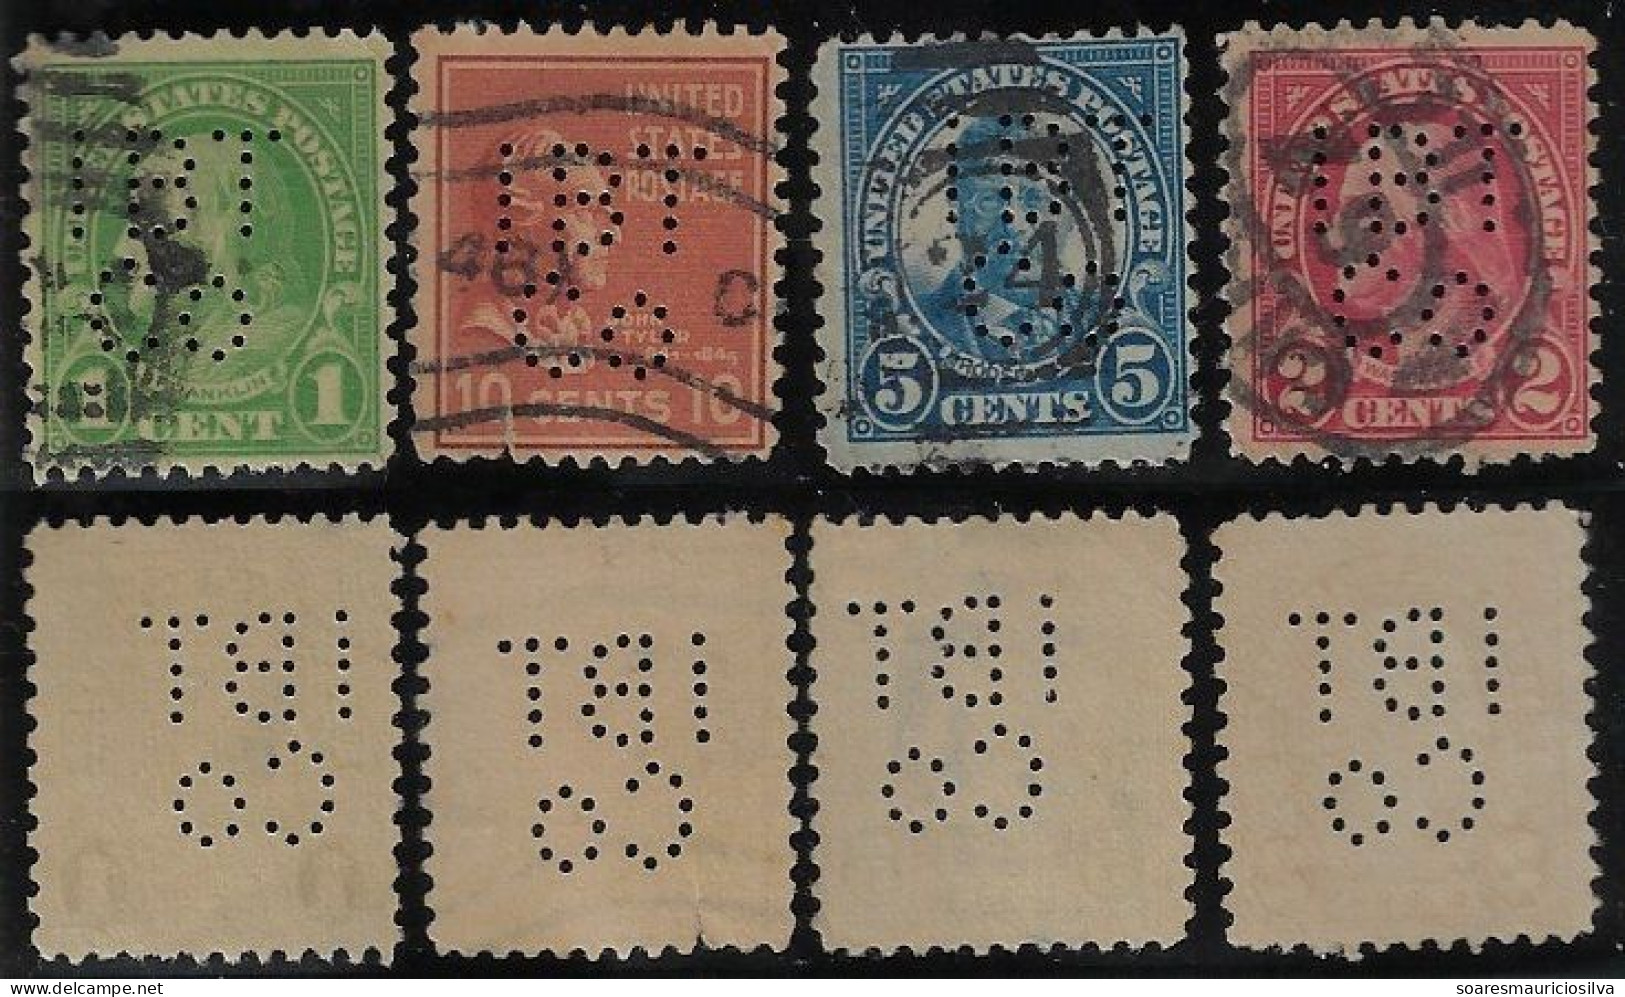 USA United States 1917/1960 4 Stamp Perfin IBT/Co By Illinois Bell Telephone Company From Chicago Lochung Perfore - Perfins